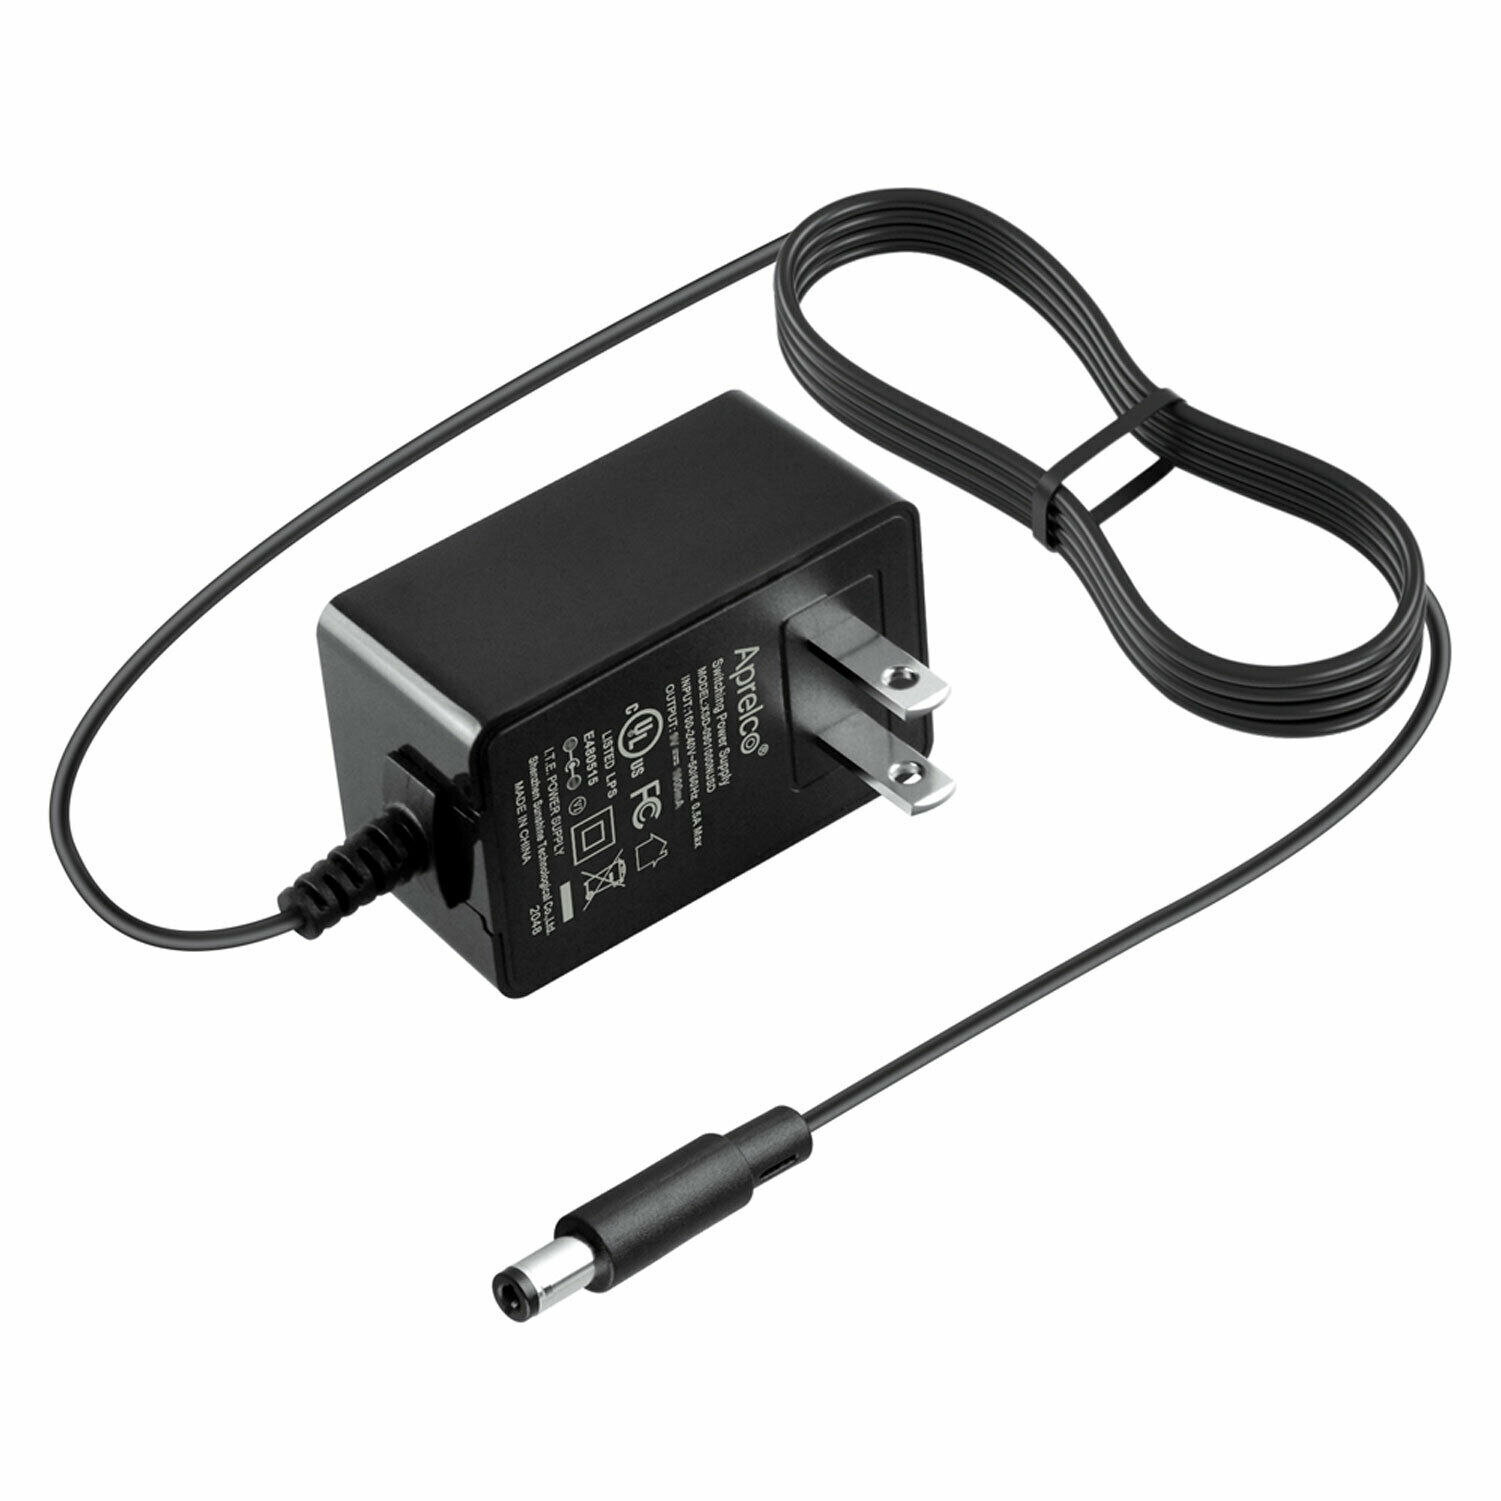 HON-KWANG Model D9100 UL AC Adapter Charger for Plug In Transformer Power Supply Guarantee : (1) We have invested tim